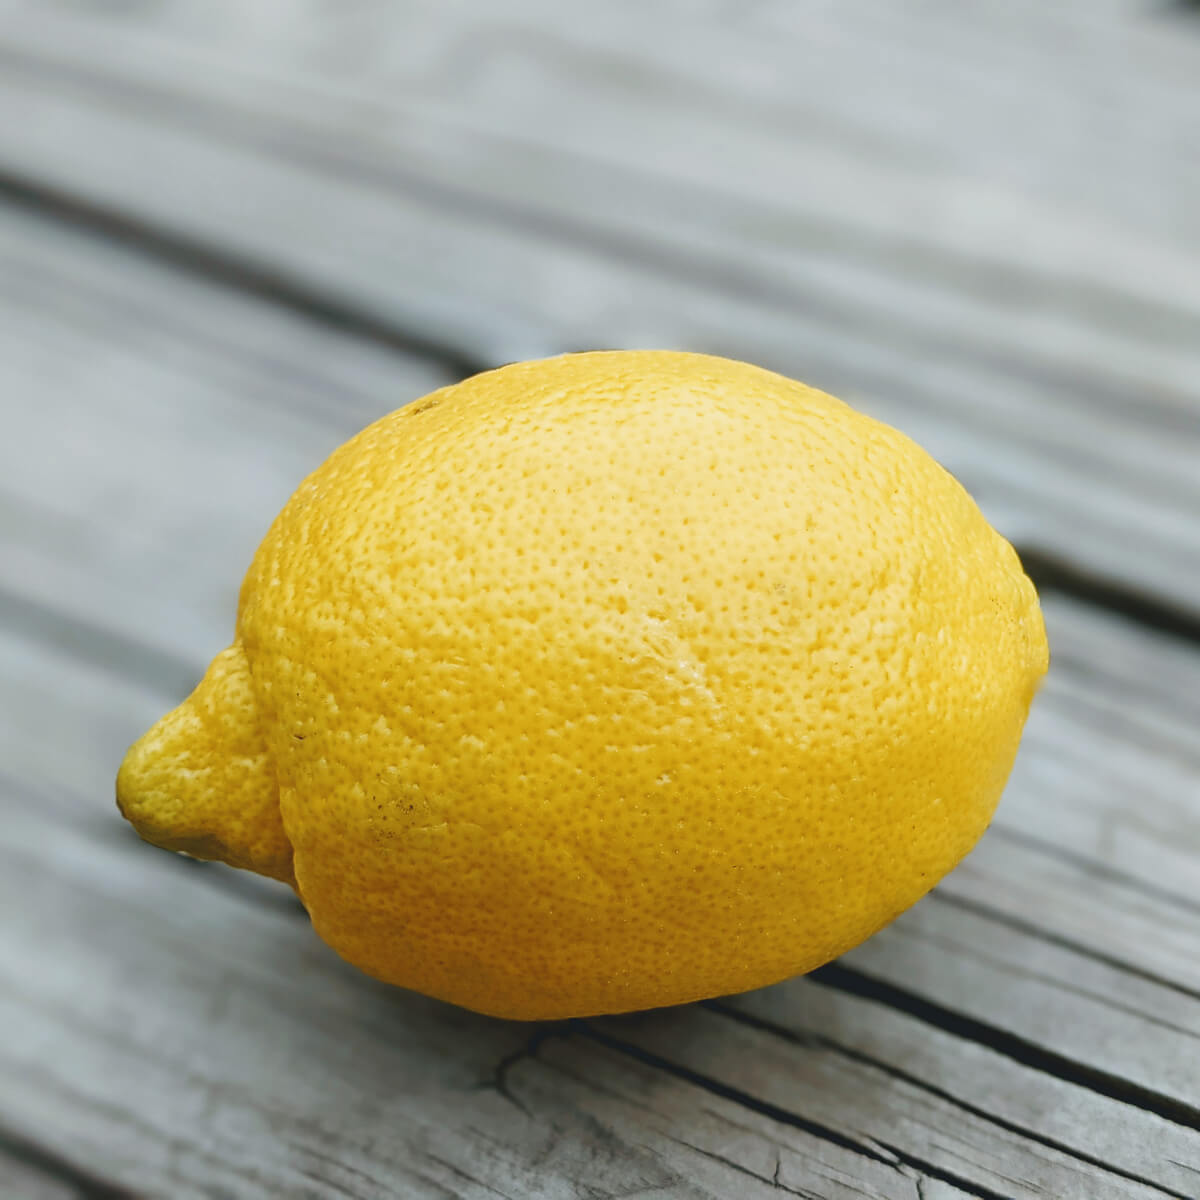 Fresh, delicious, yellow lemon on a wooden deck